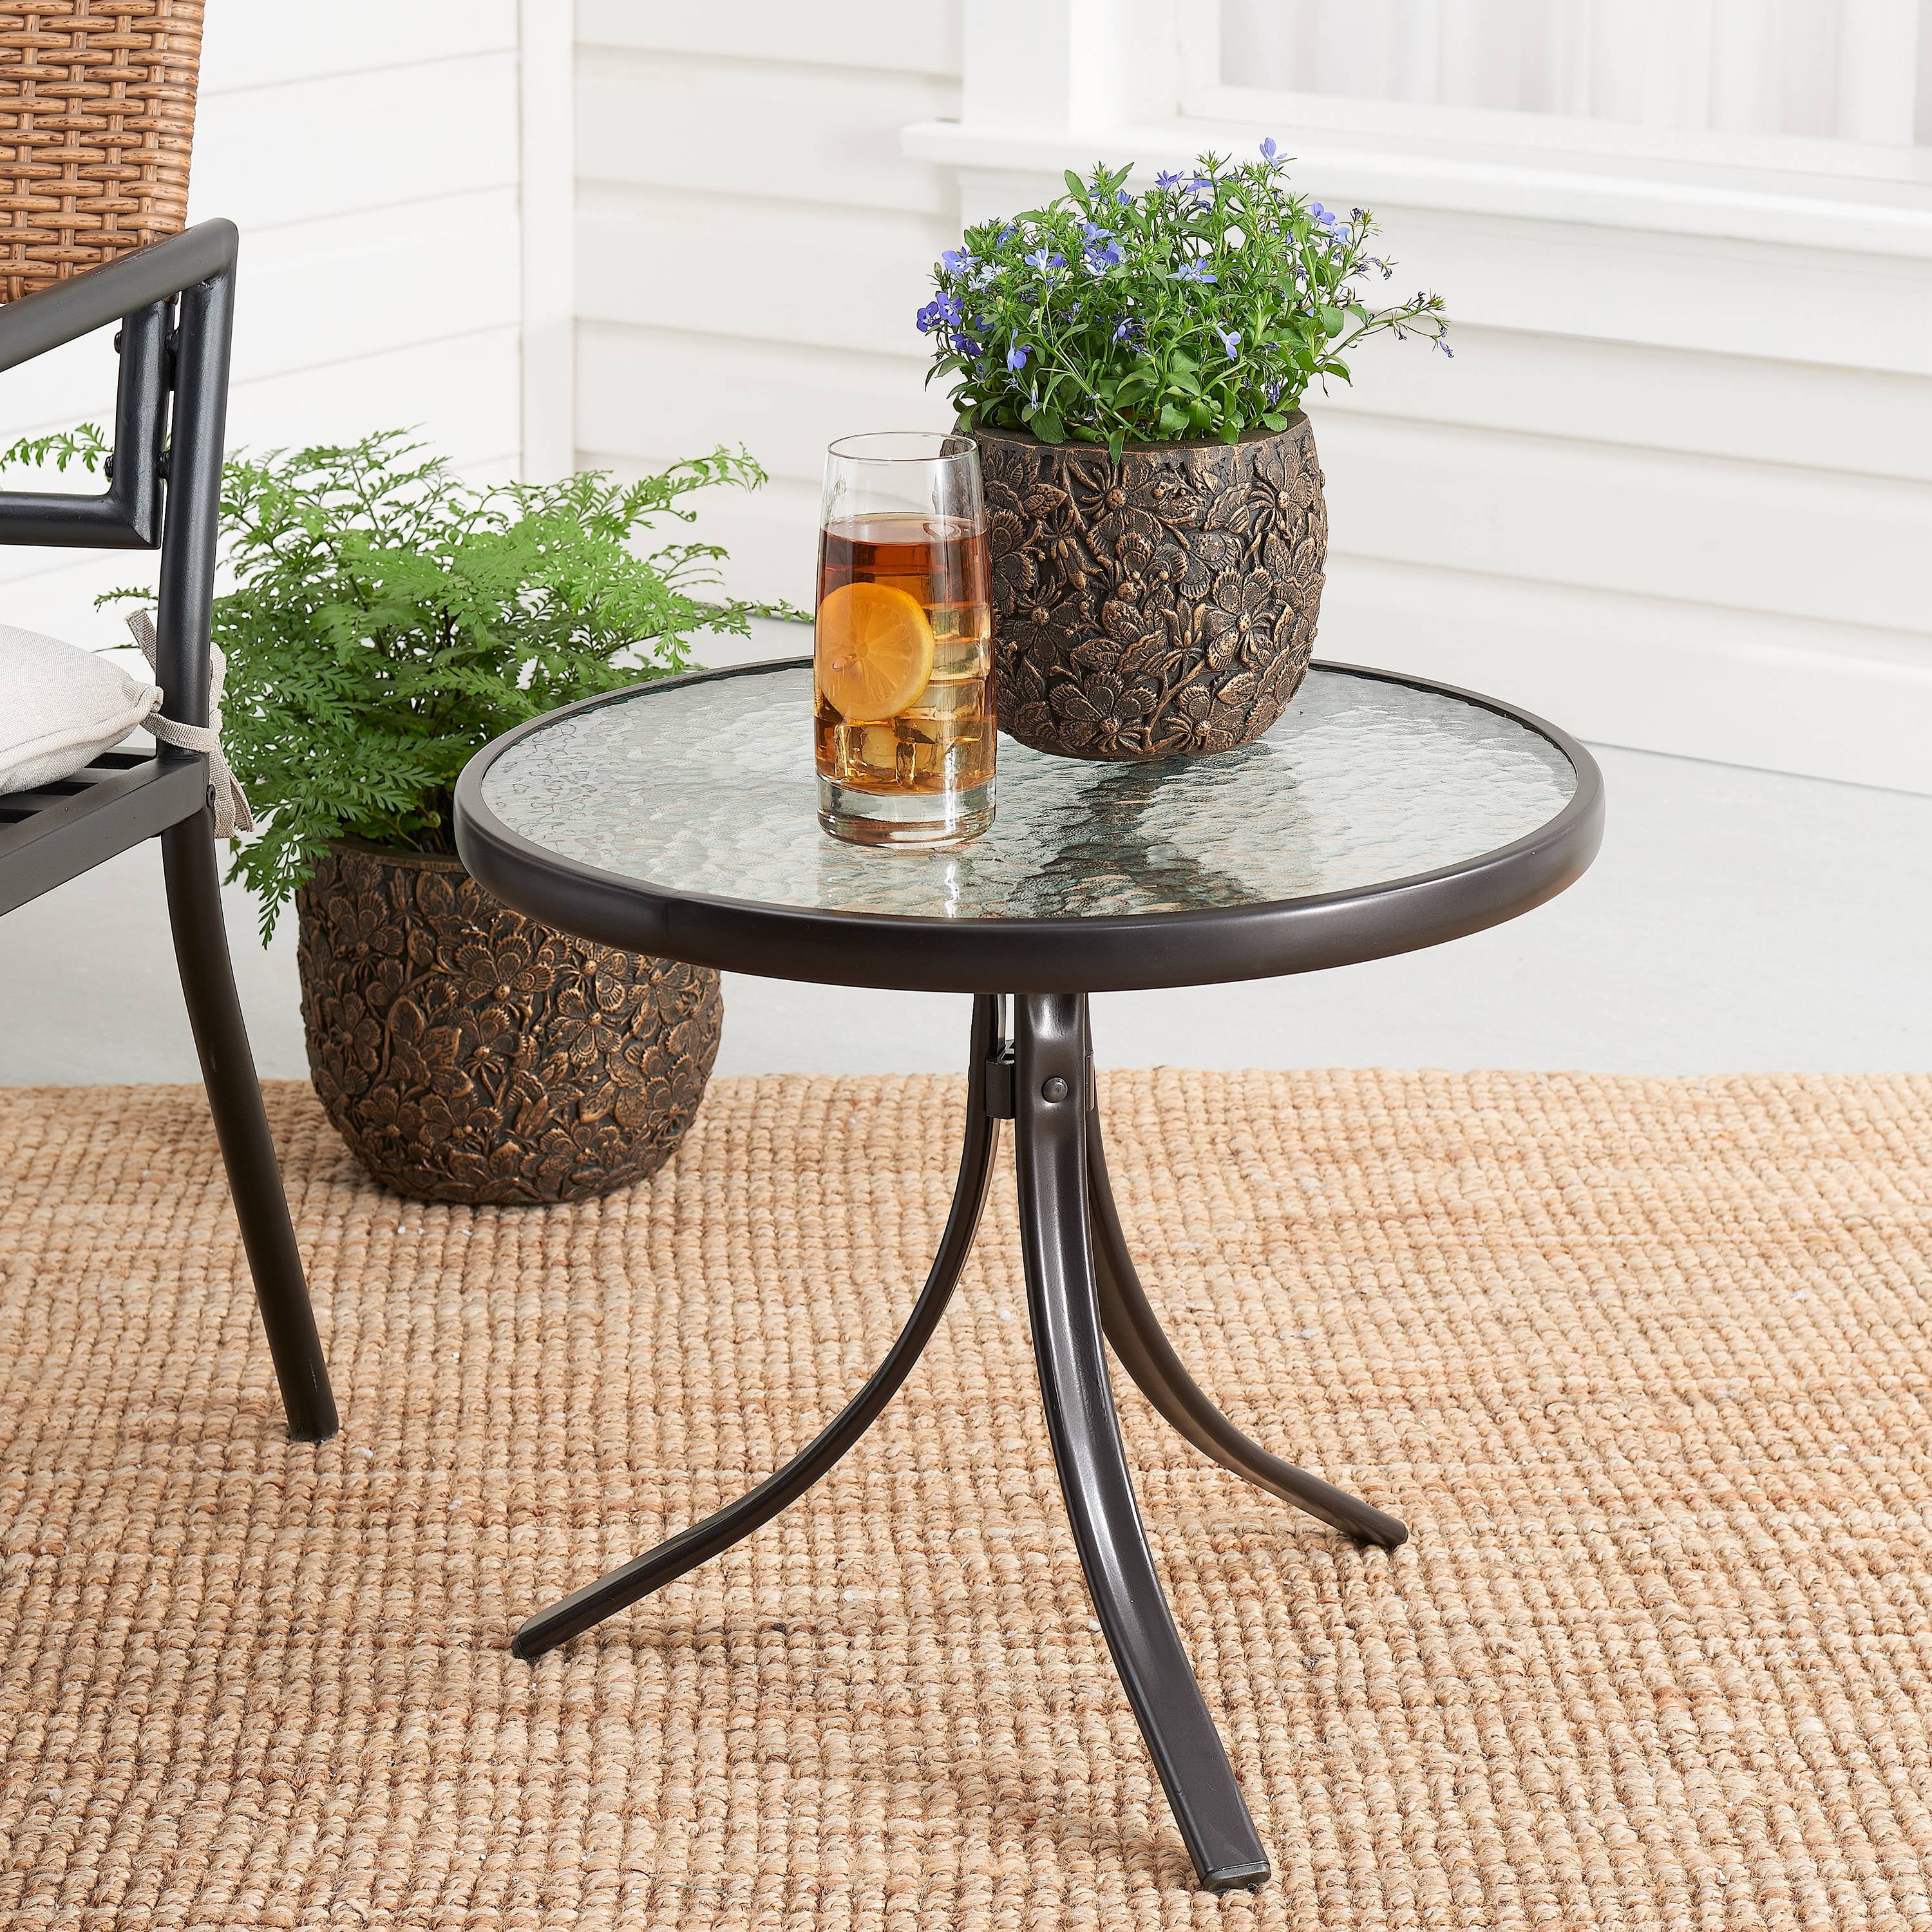 Mainstays Round Glass Patio Table, 20